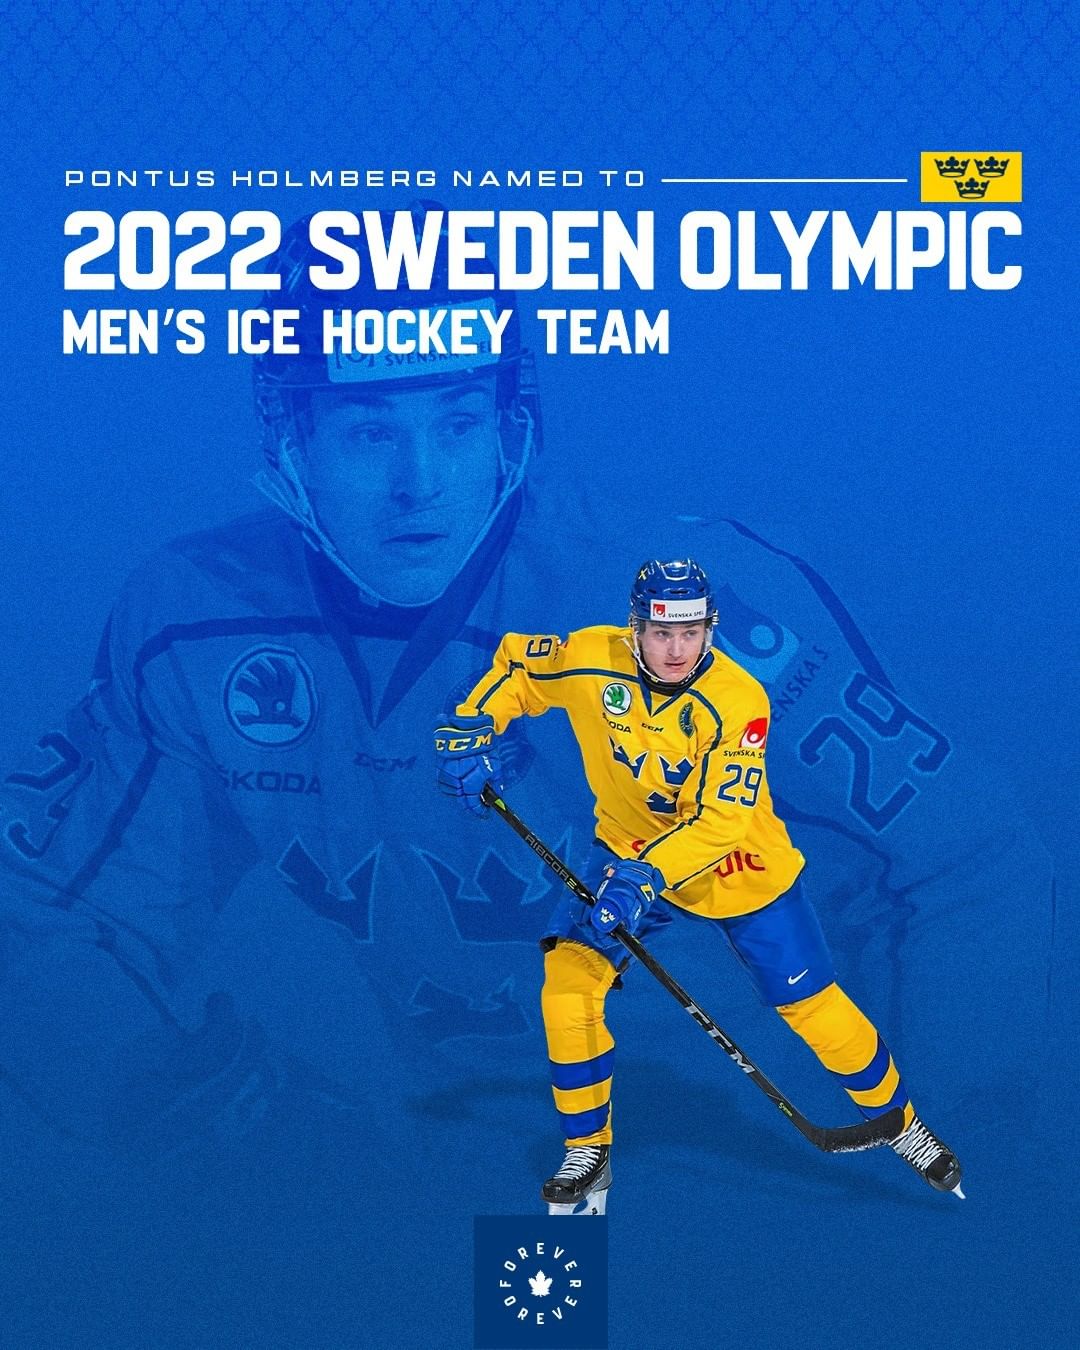 Congratulations to Pontus Holmberg on being named to Sweden’s Men’s Olympic hock...